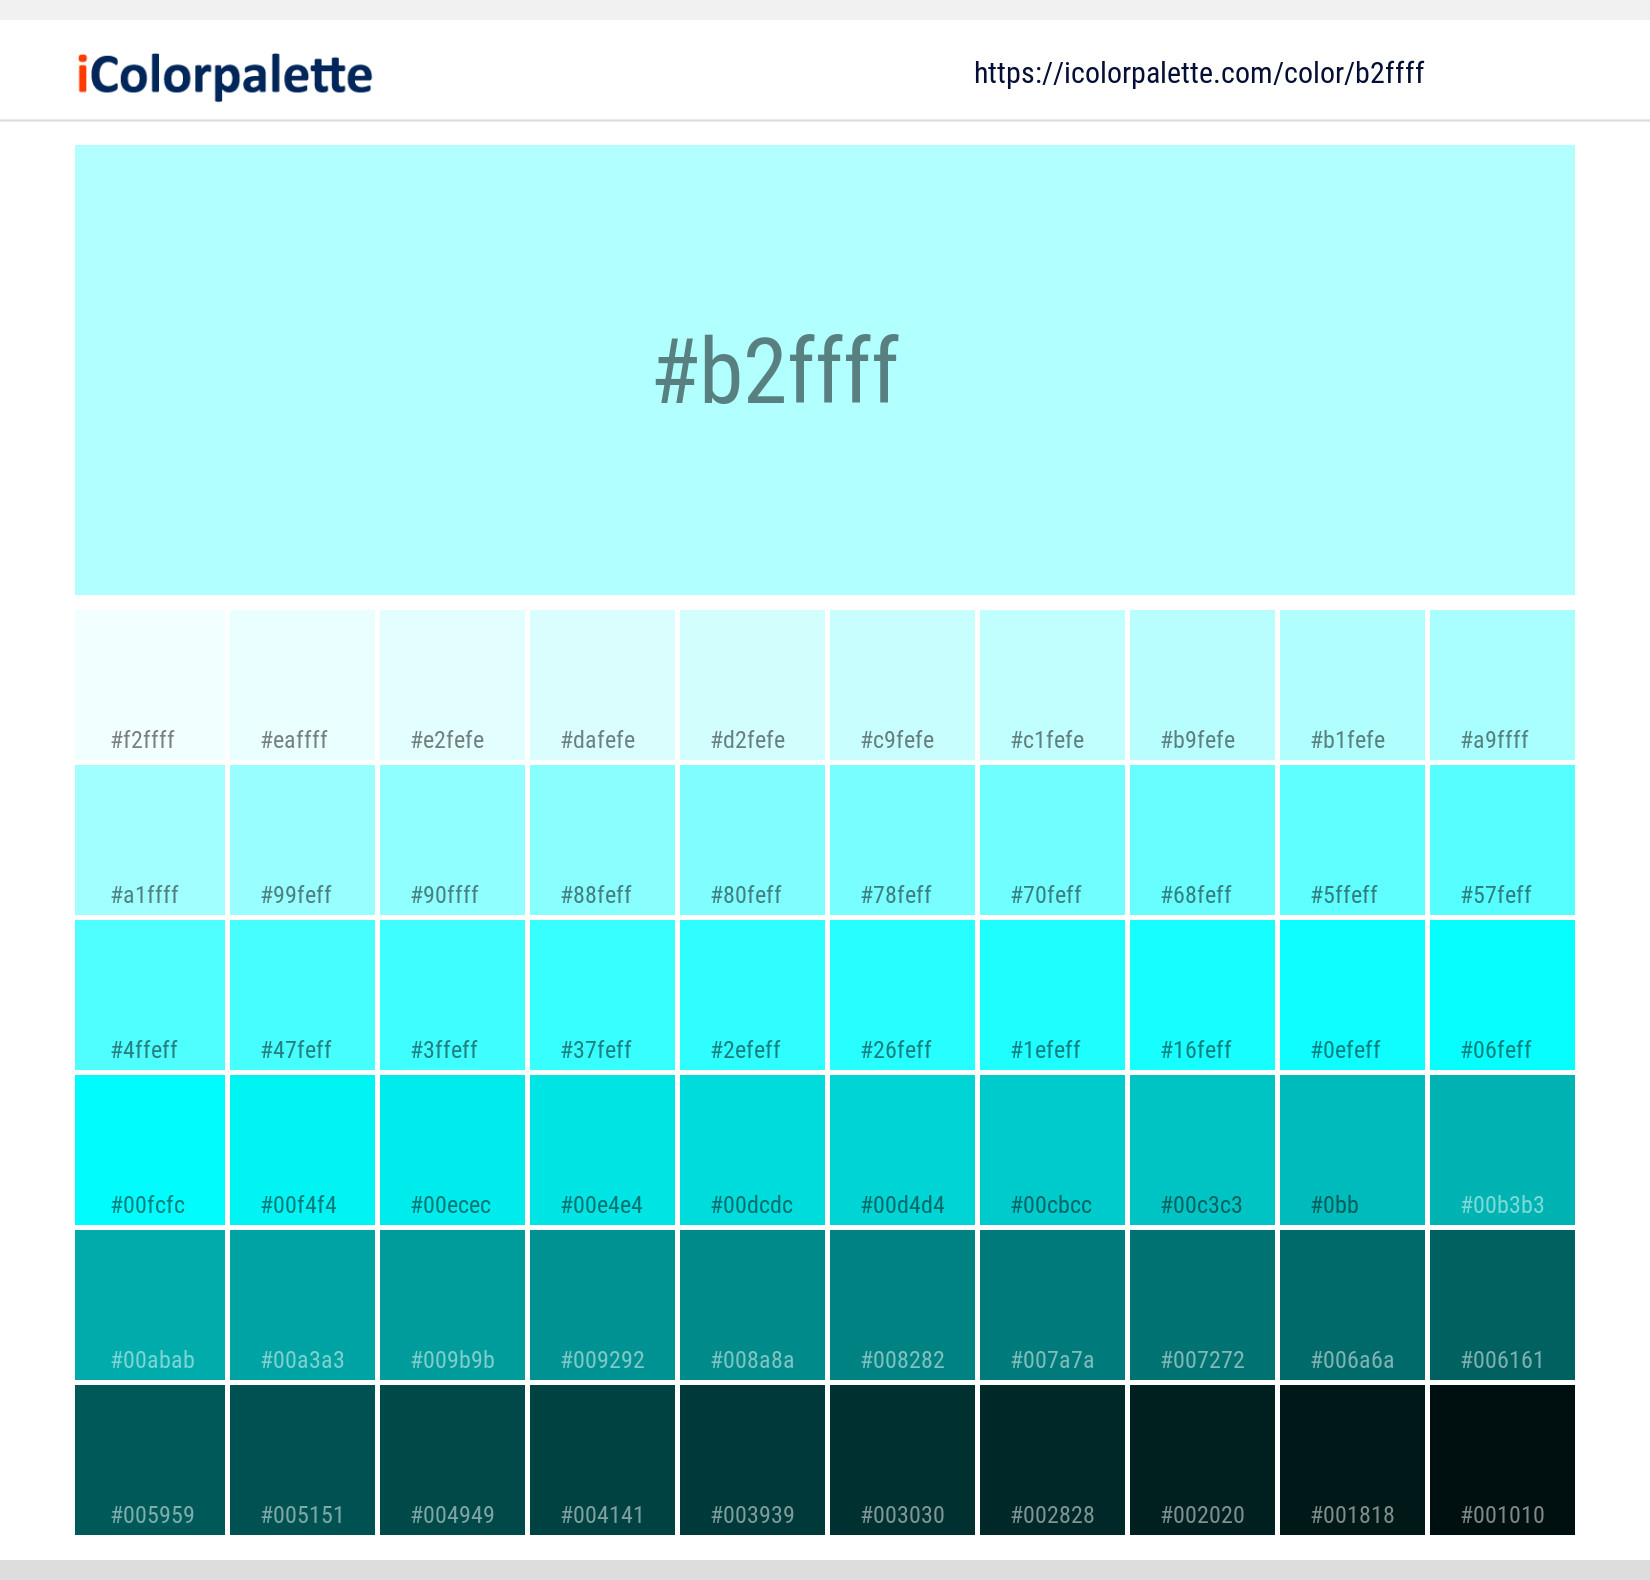 Celeste Color - HEX #B2FFFF Meaning and Live Previews - PaletteMaker